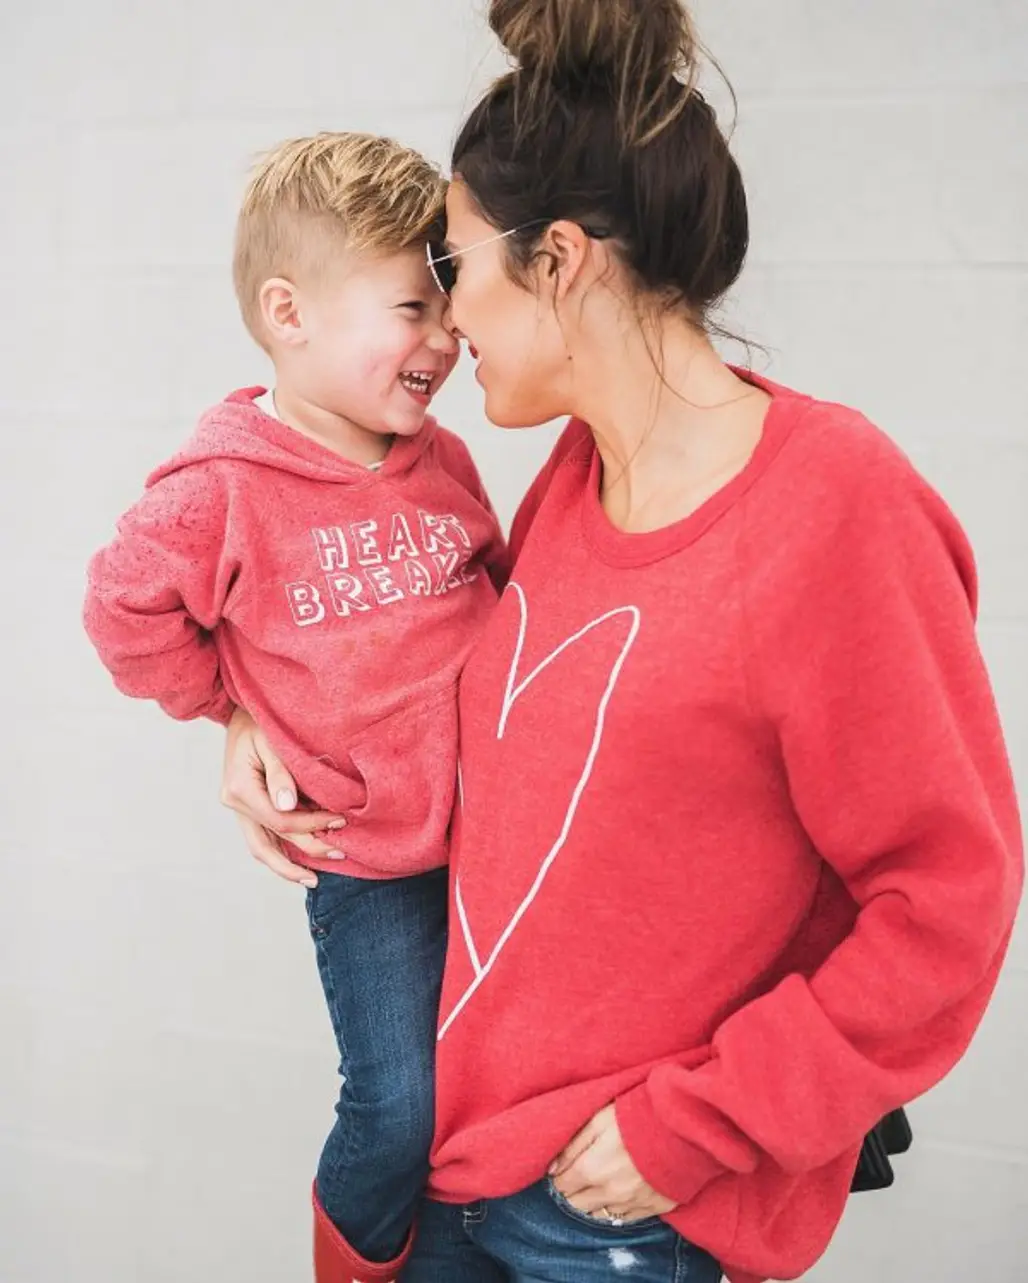 person, clothing, red, child, toddler,